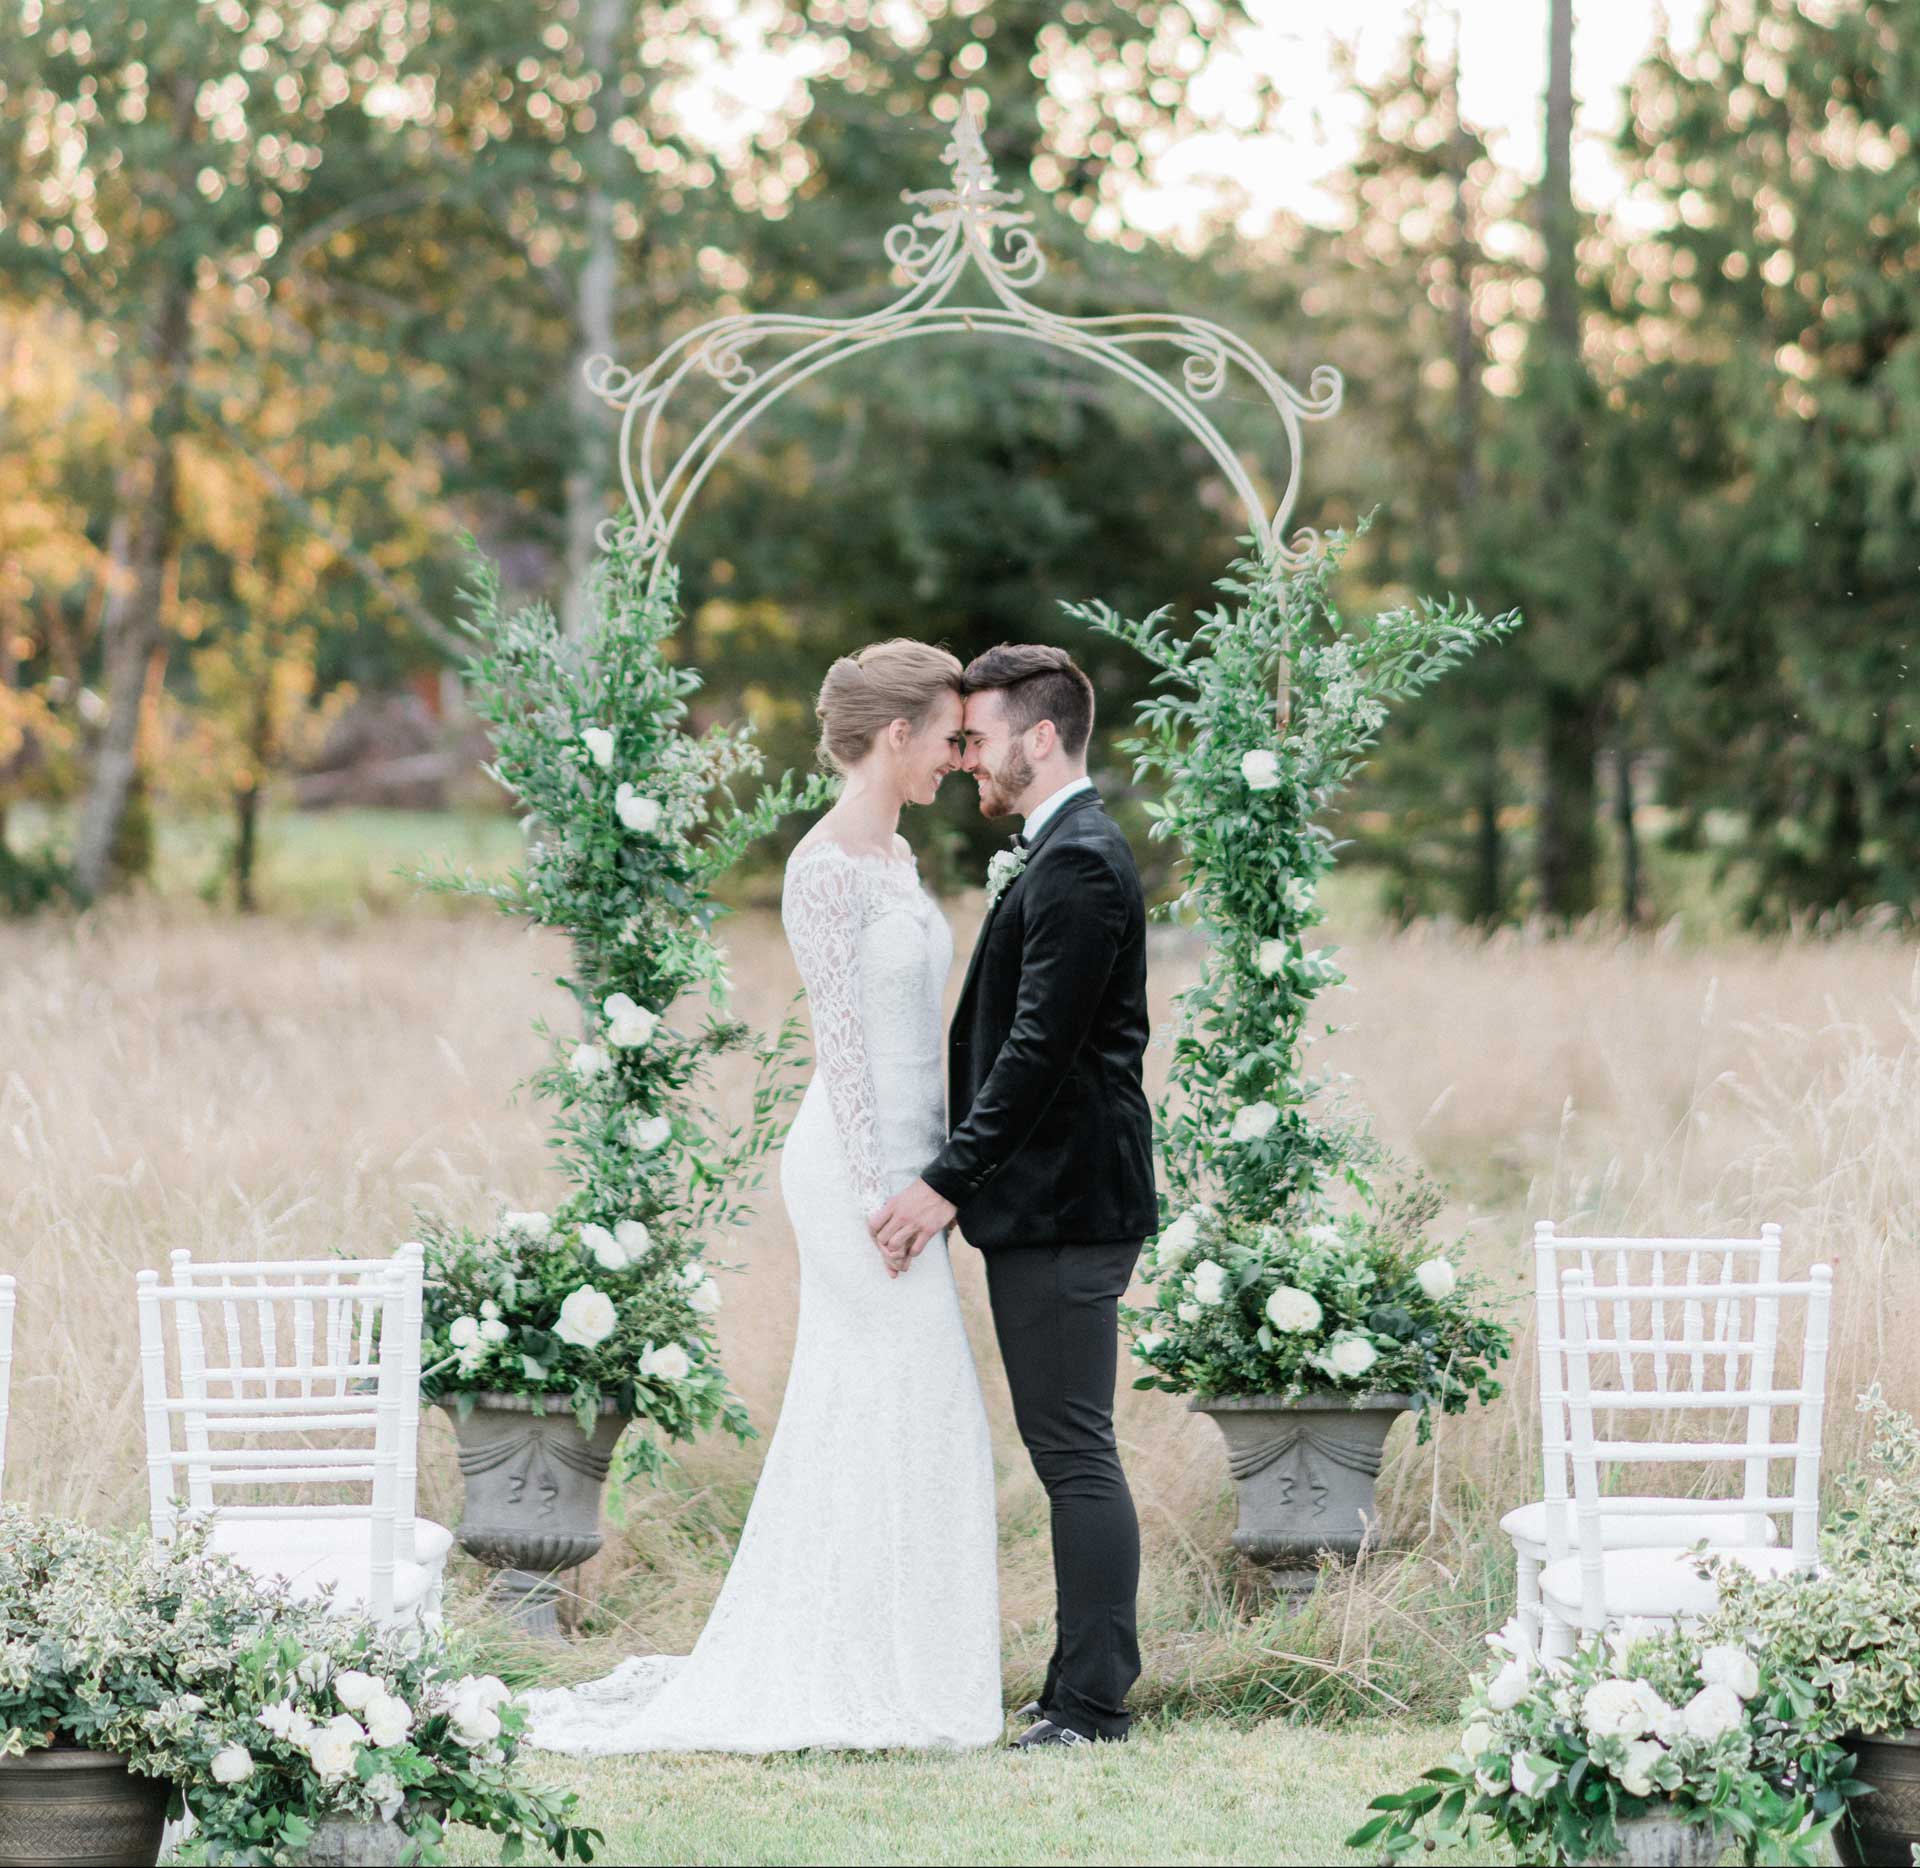 French Countryside Wedding Inspiration Vintage Arbor with bride and groom